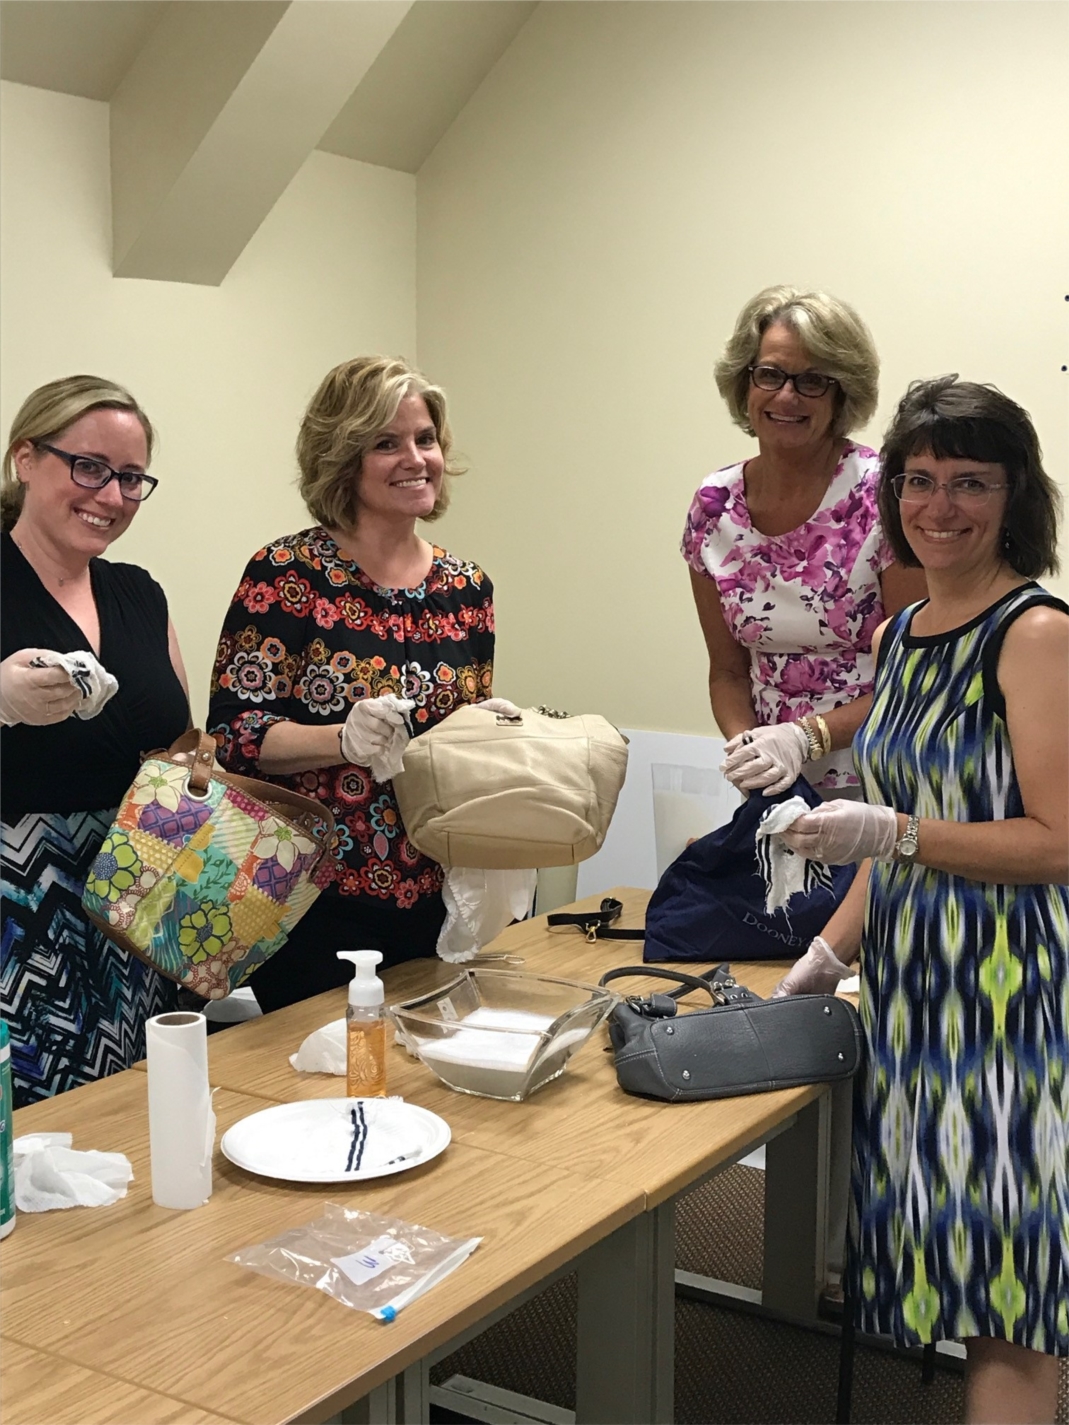 Volunteer employees collected and cleaned donated purses to help with the annual Purse Sale to benefit Harford Family House and support homeless families in Harford County.